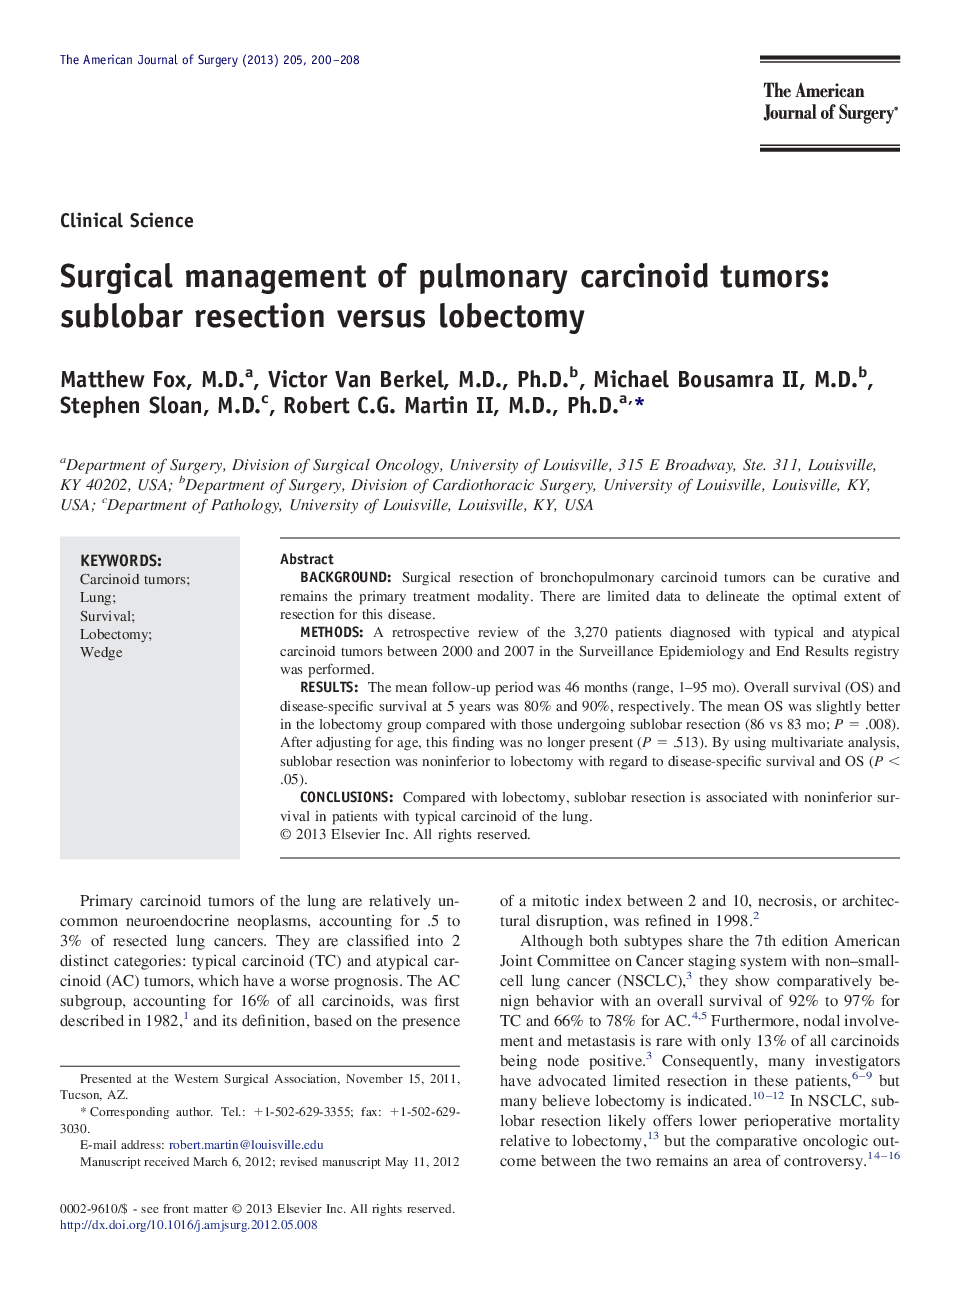 Surgical management of pulmonary carcinoid tumors: sublobar resection versus lobectomy